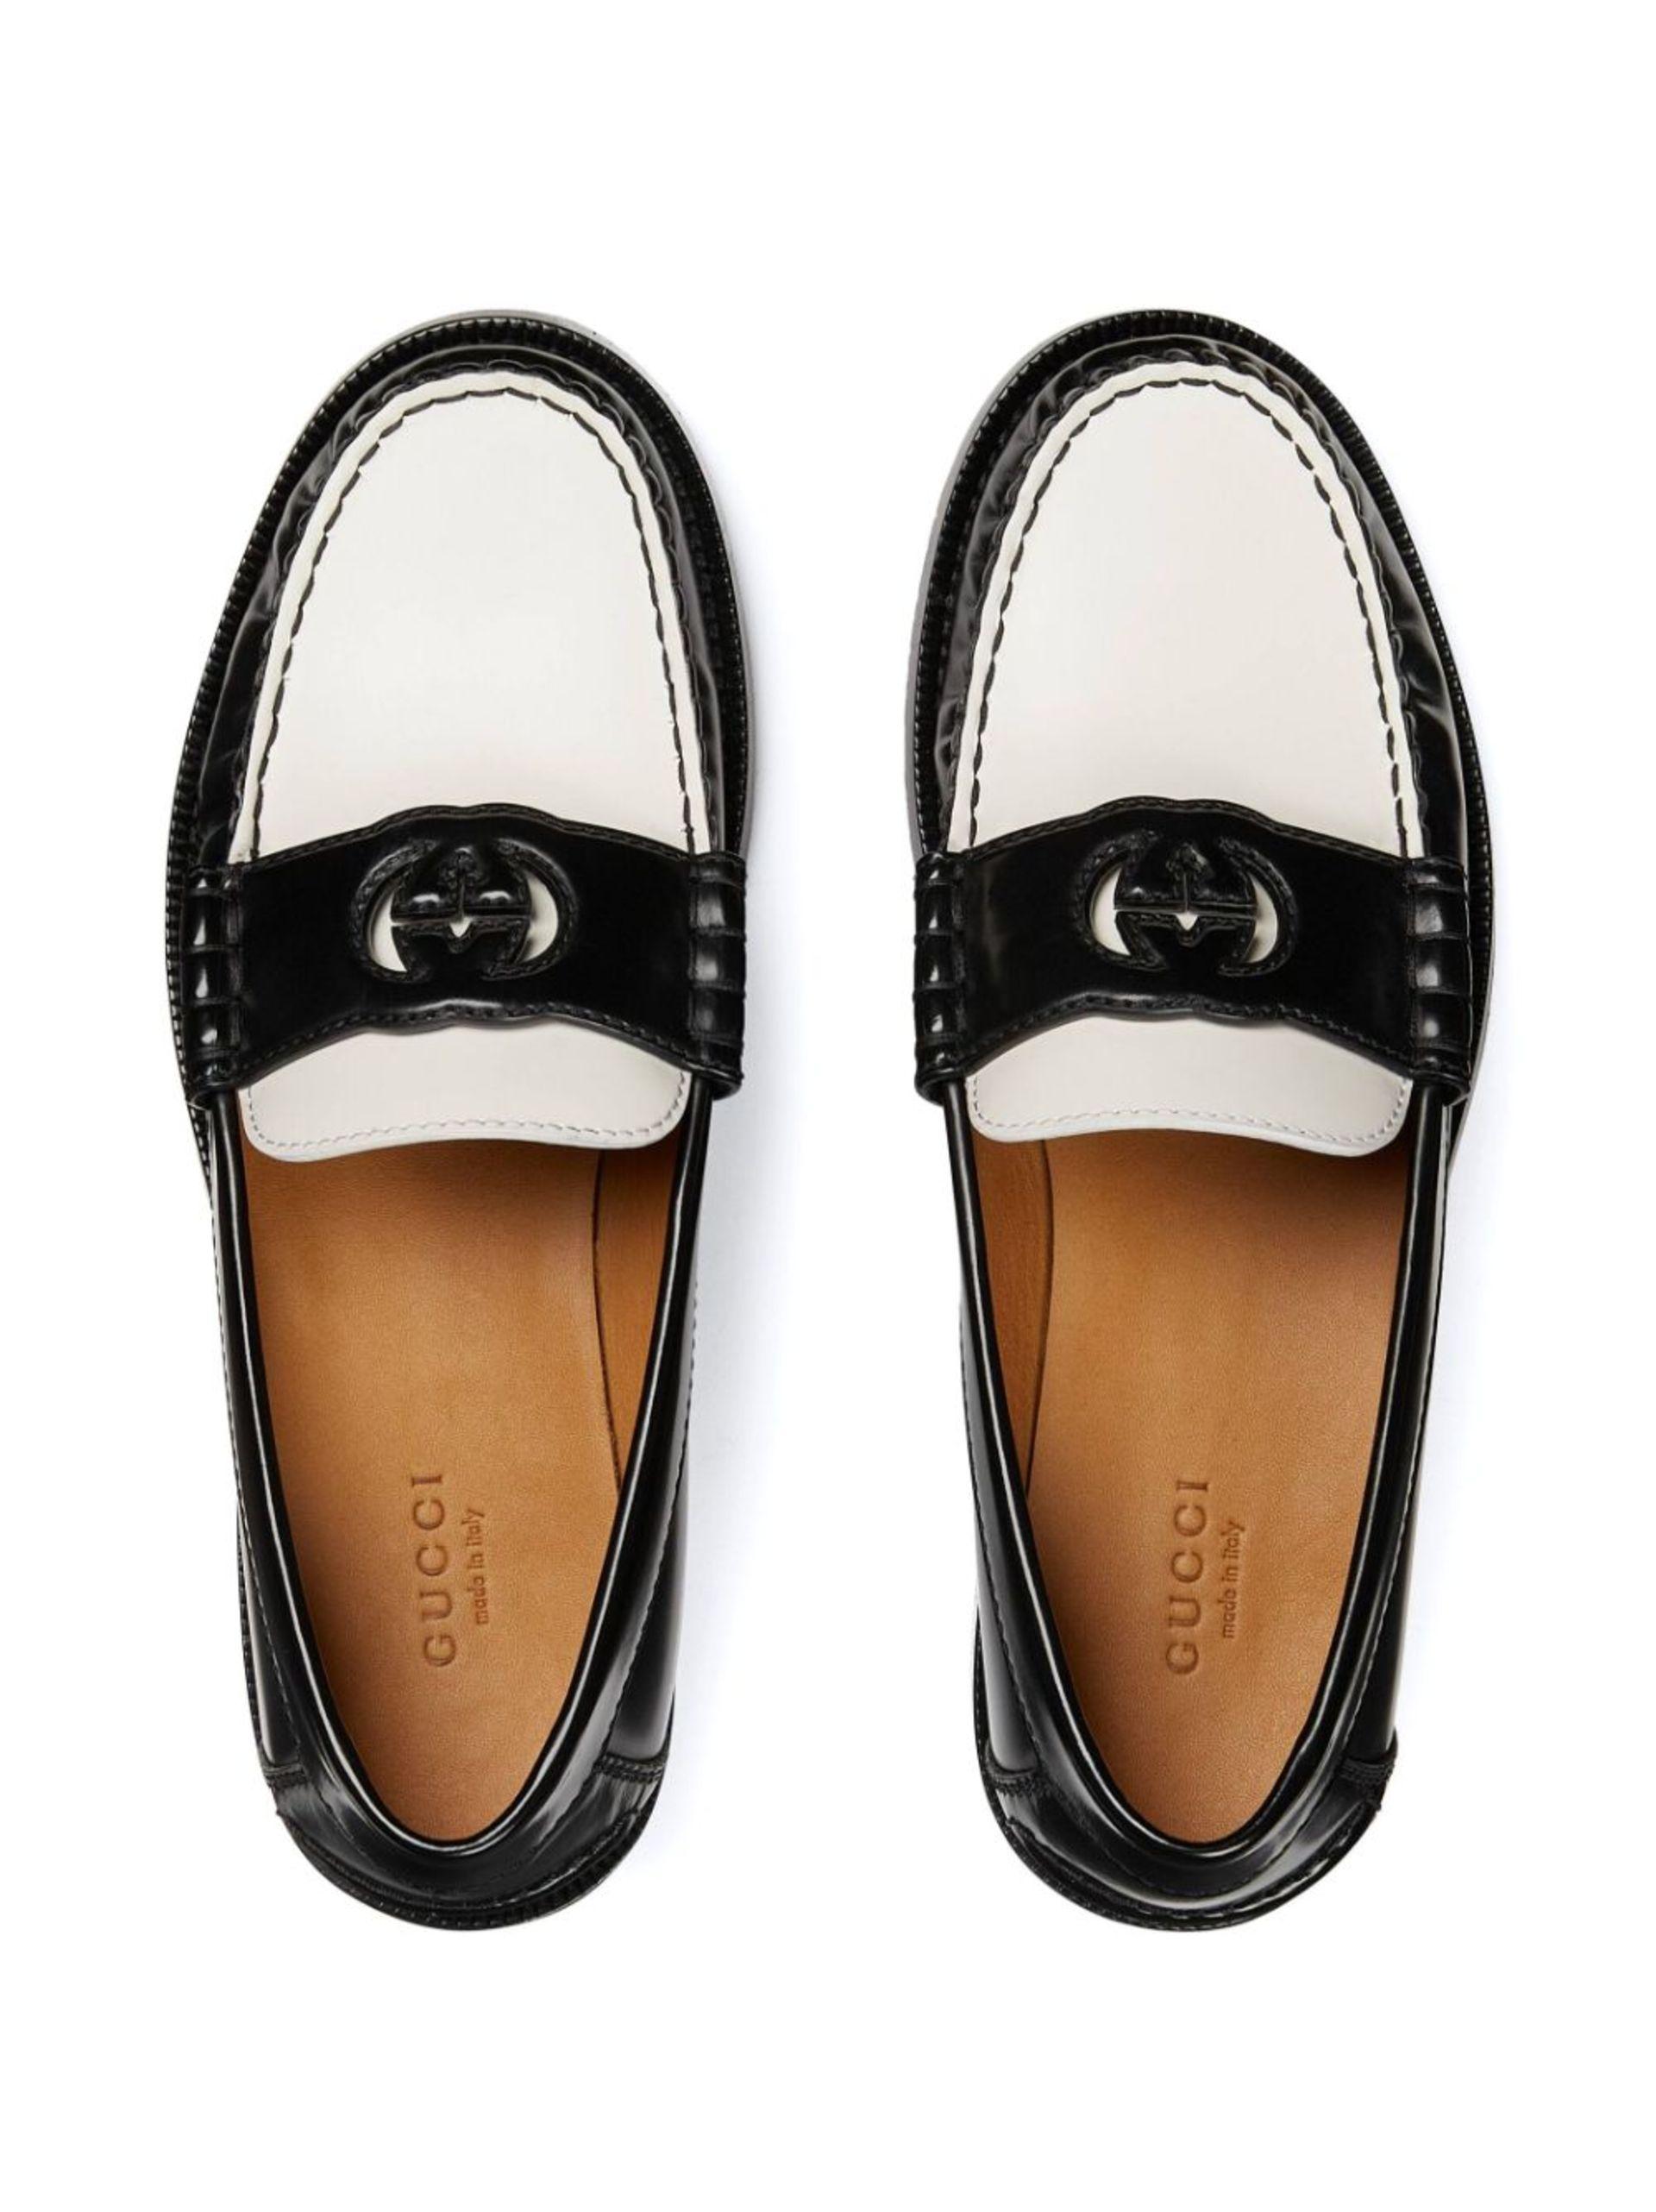 Gucci Interlocking G Leather Loafers in Black | Lyst